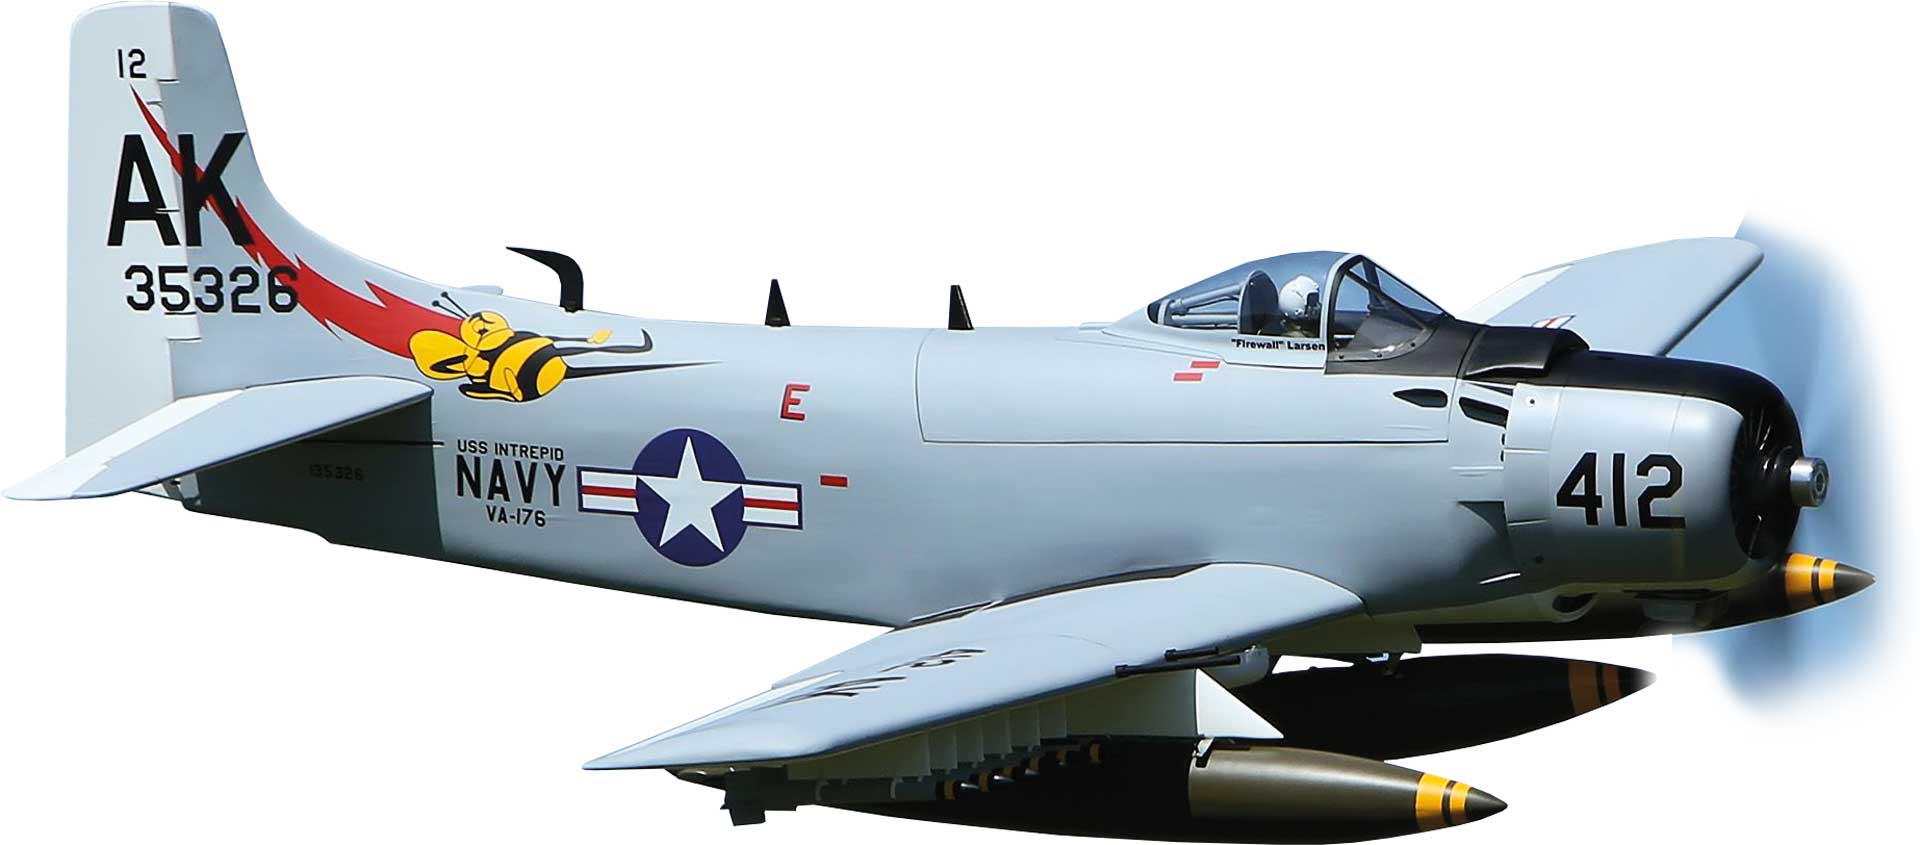 Seagull Models ( SG-Models ) Skyraider 86" Grey/white without Retractable landing gear